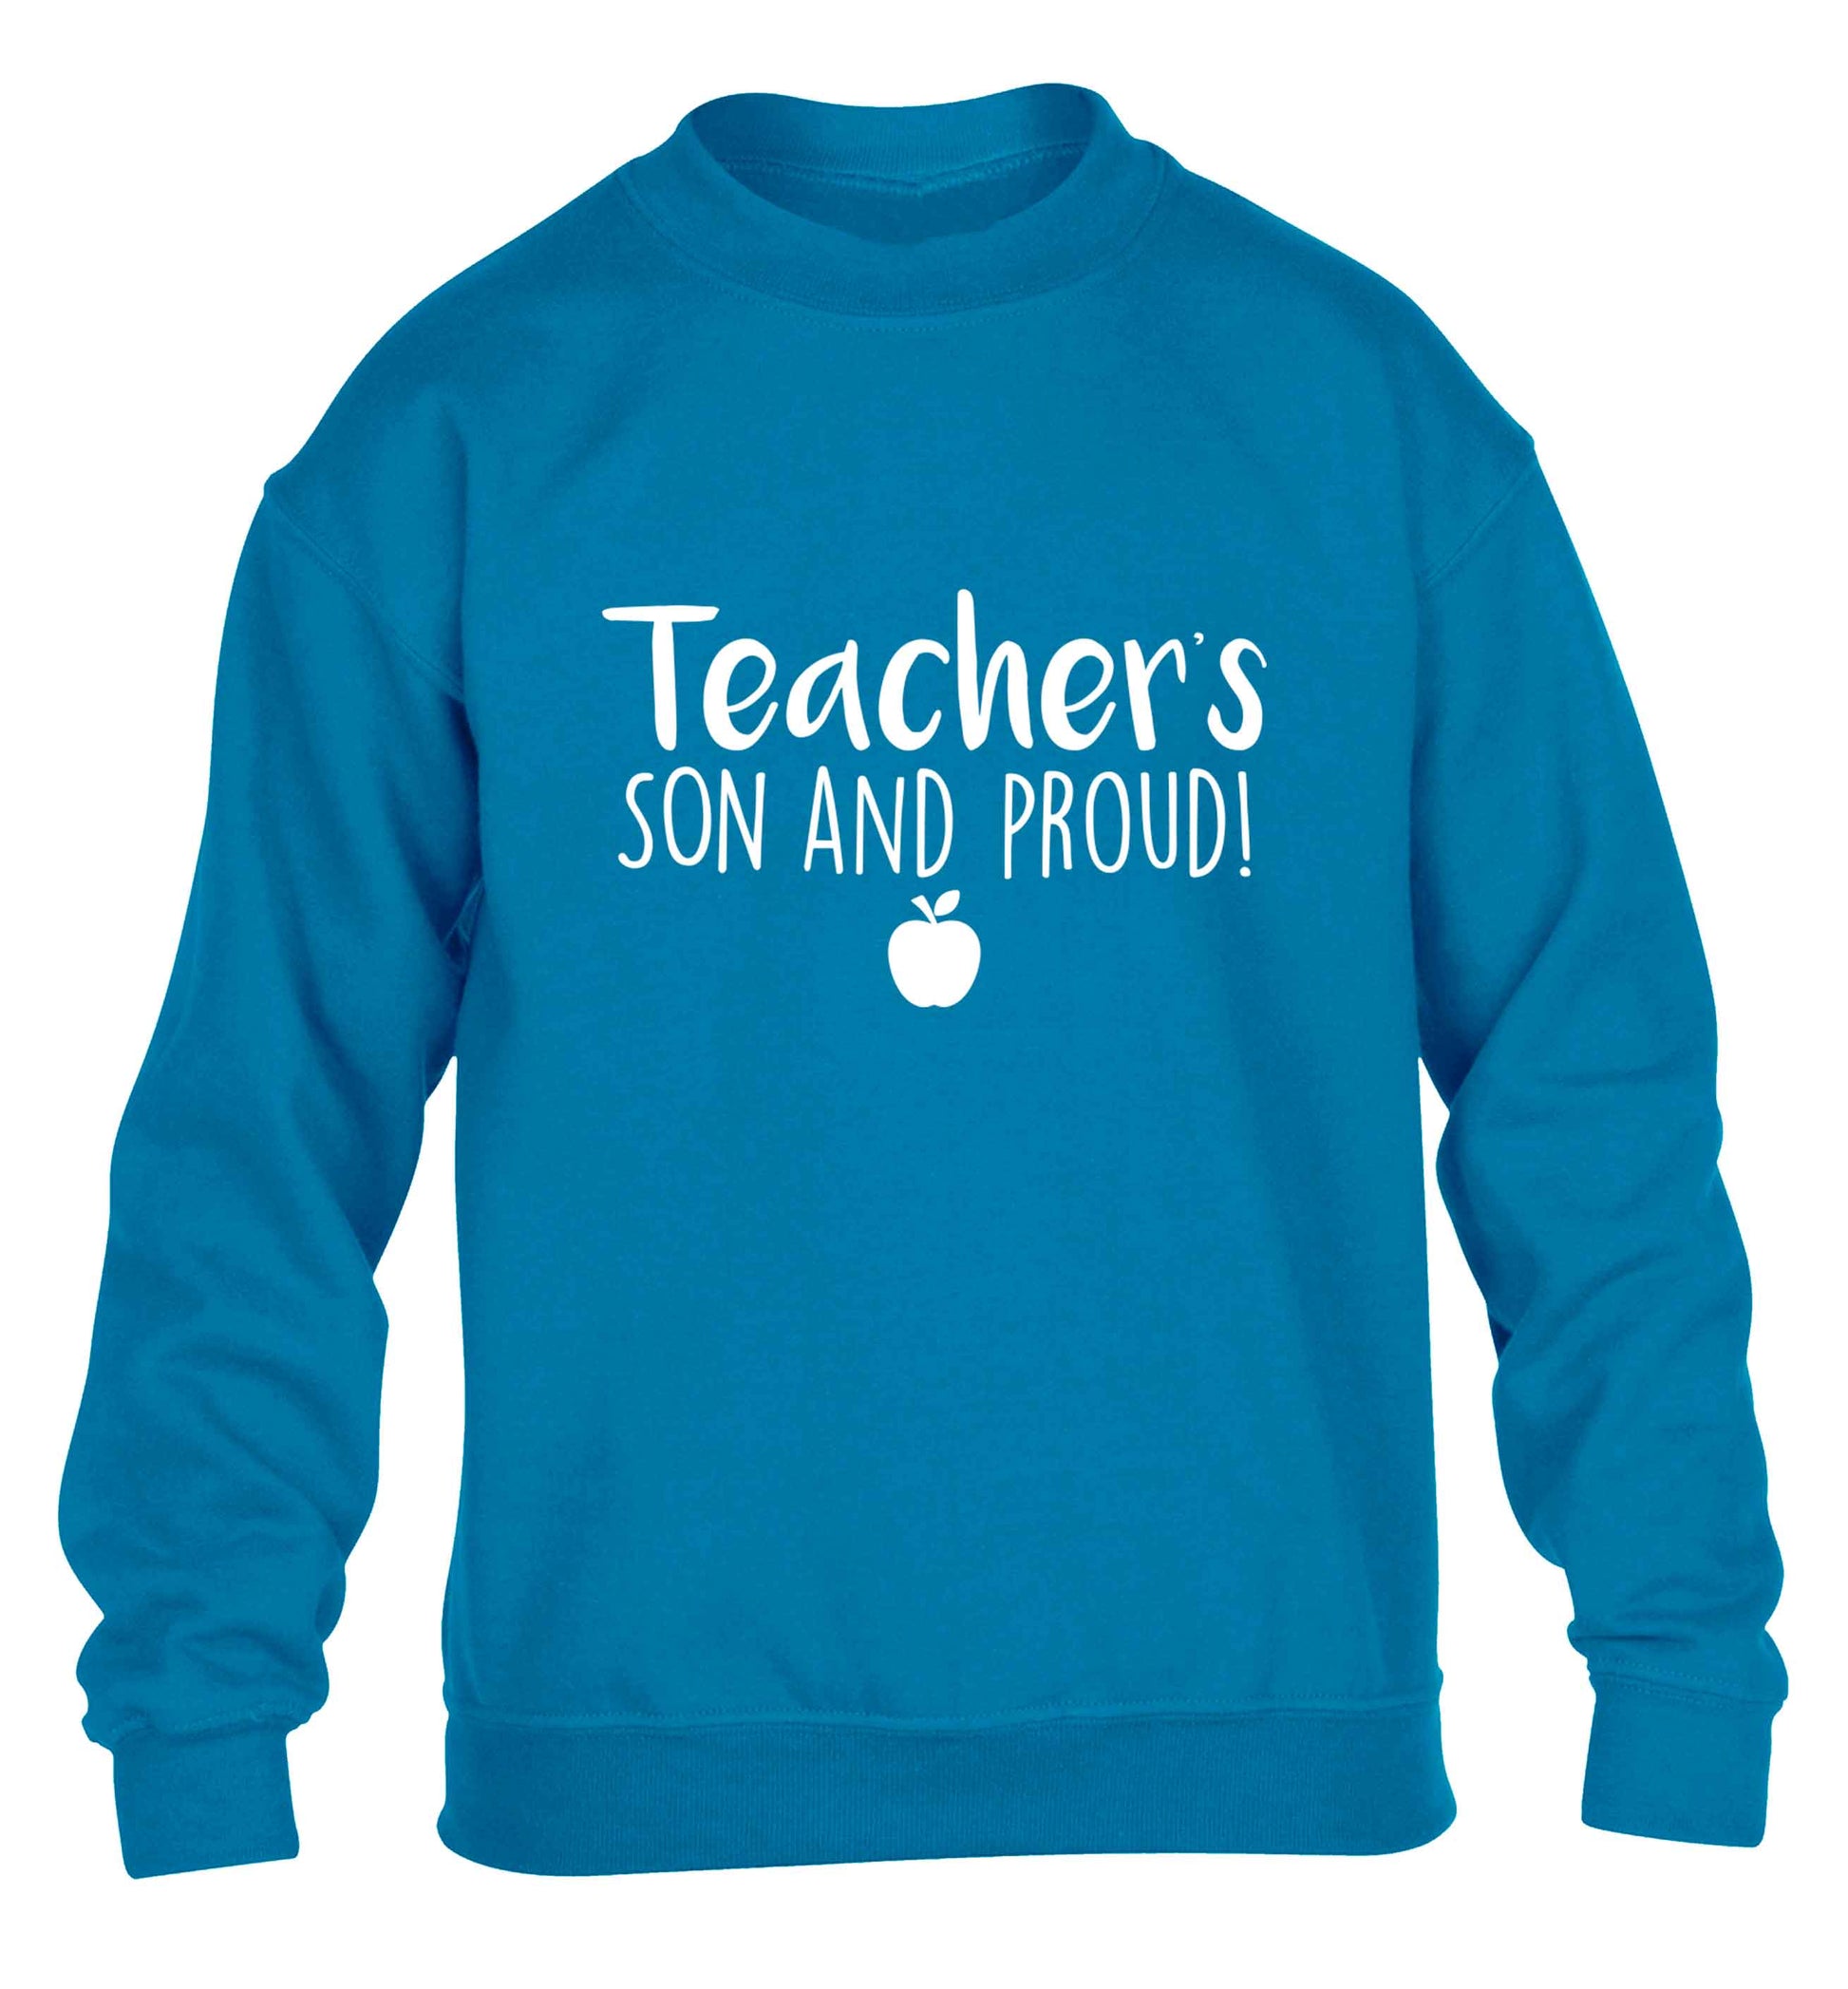 Teachers son and proud children's blue sweater 12-13 Years